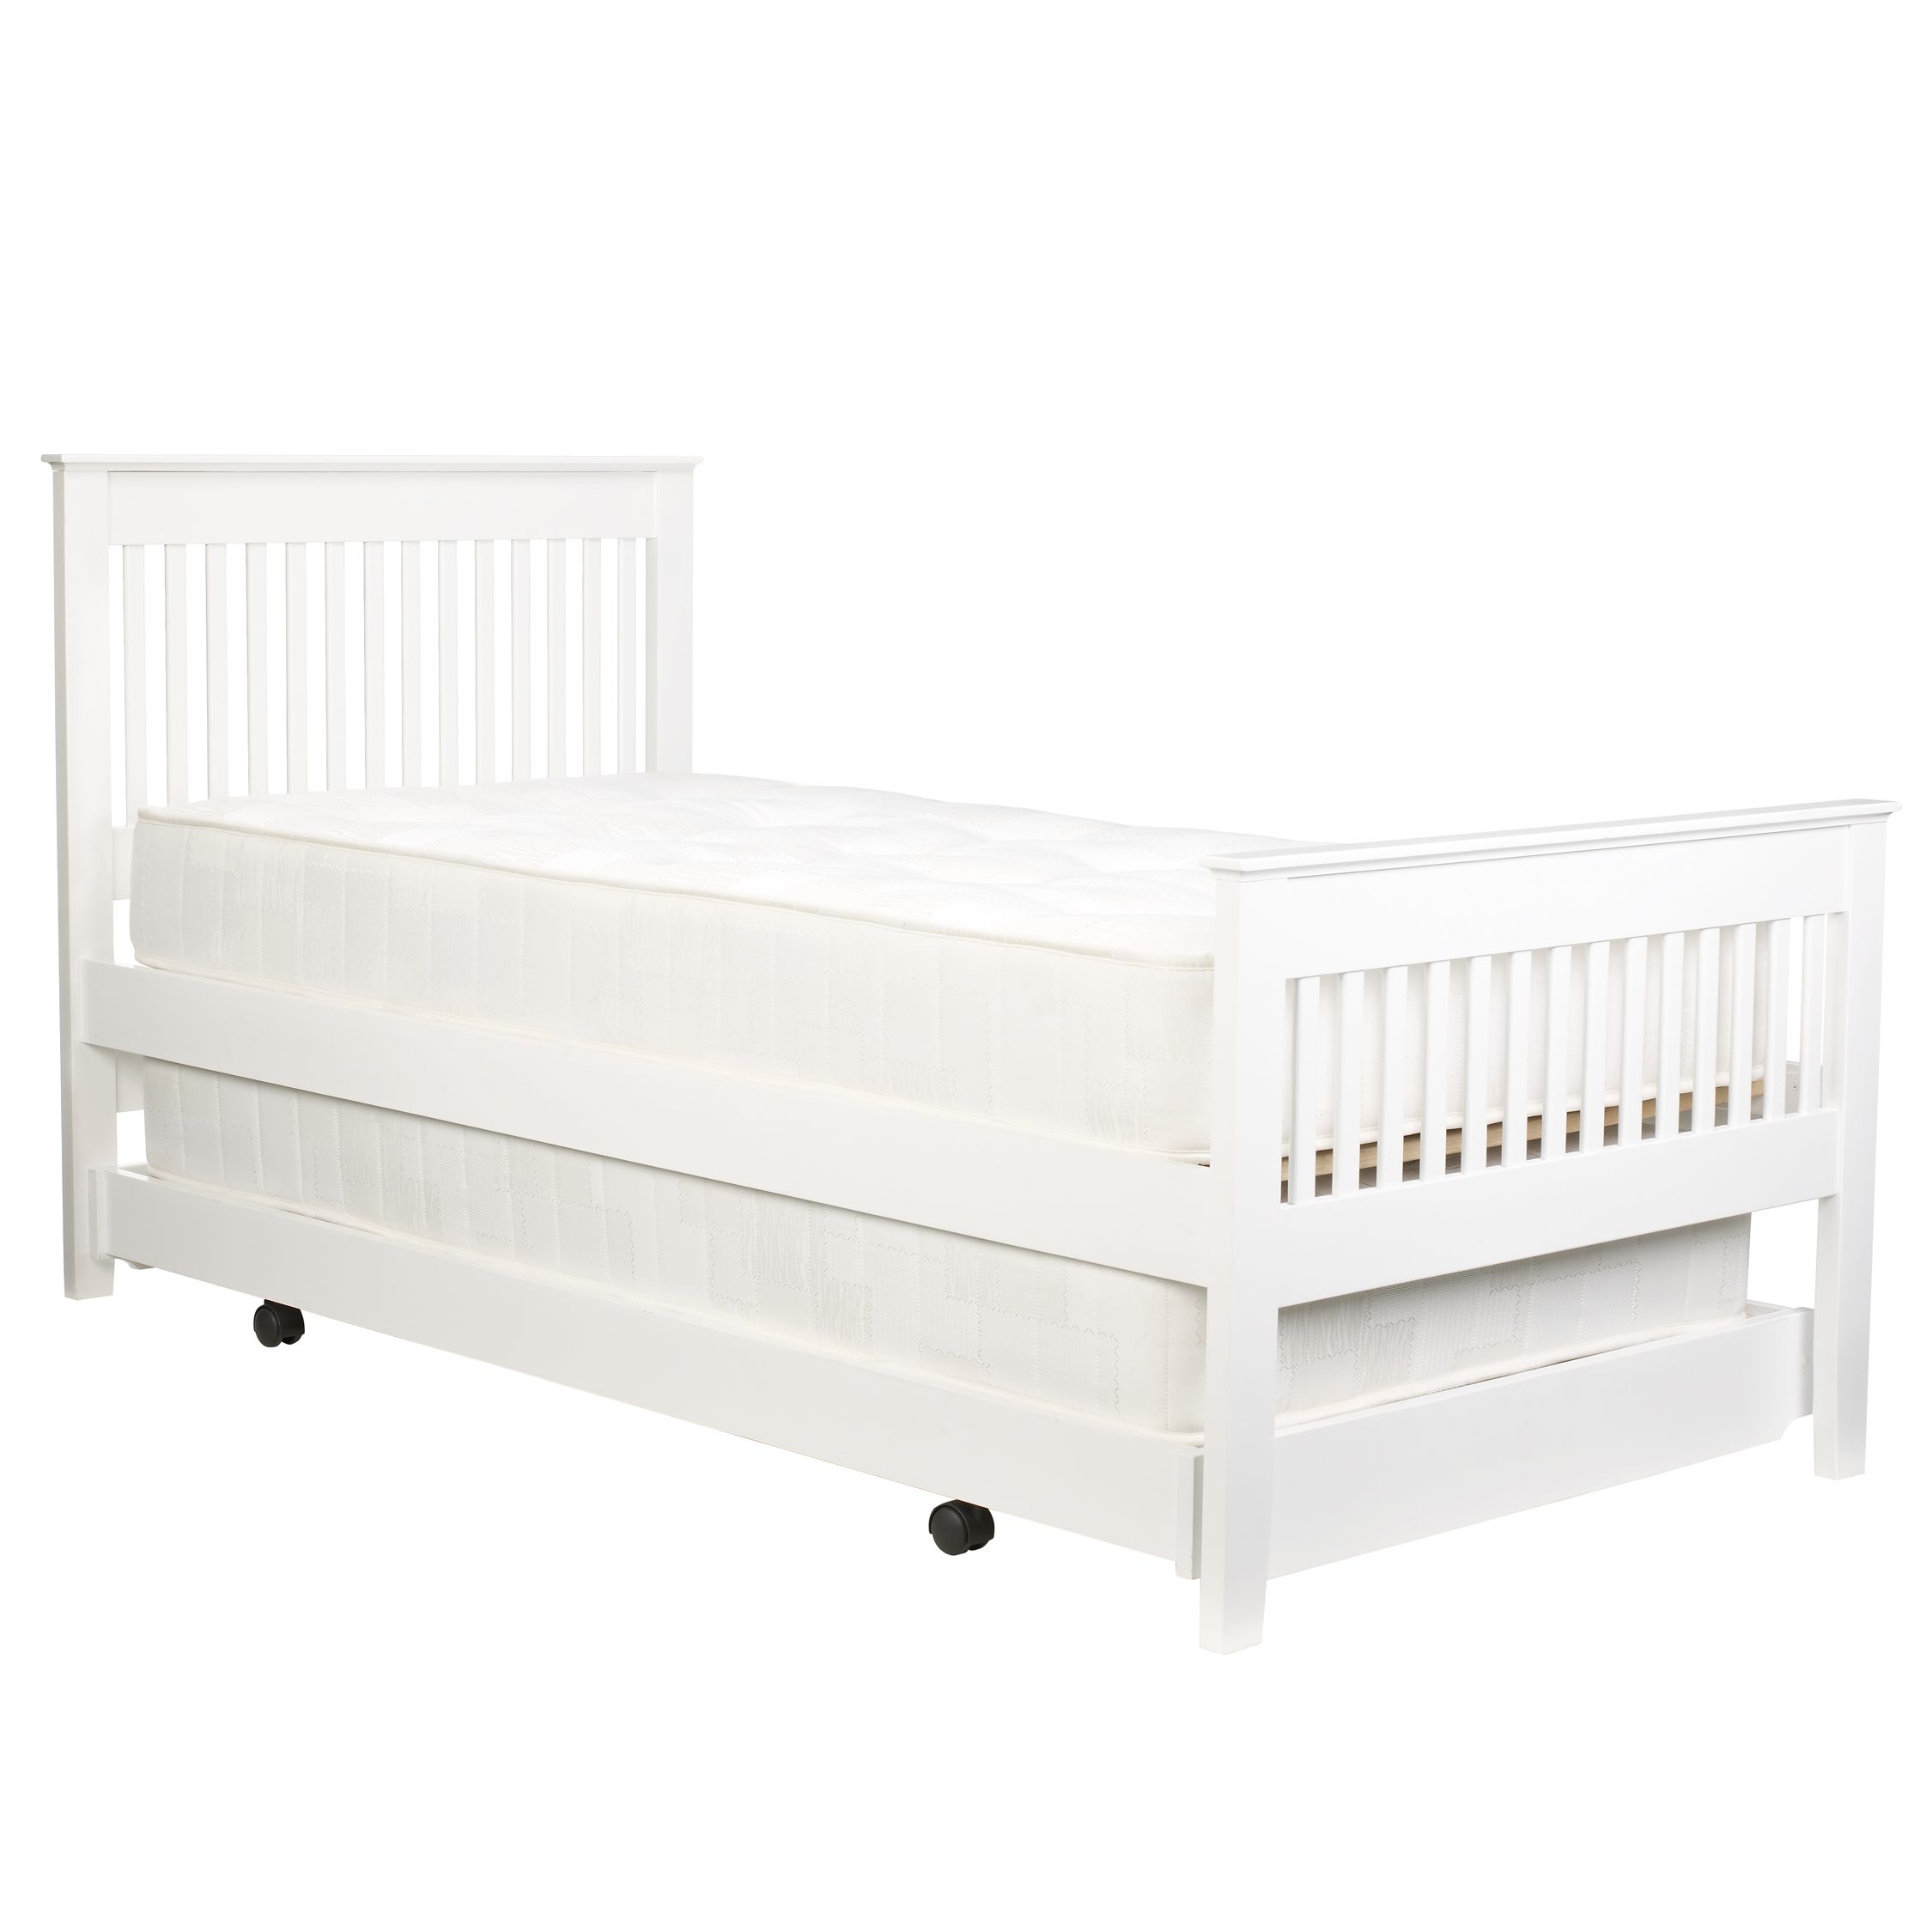 John Lewis Riley Guest Bed, White, 90cm